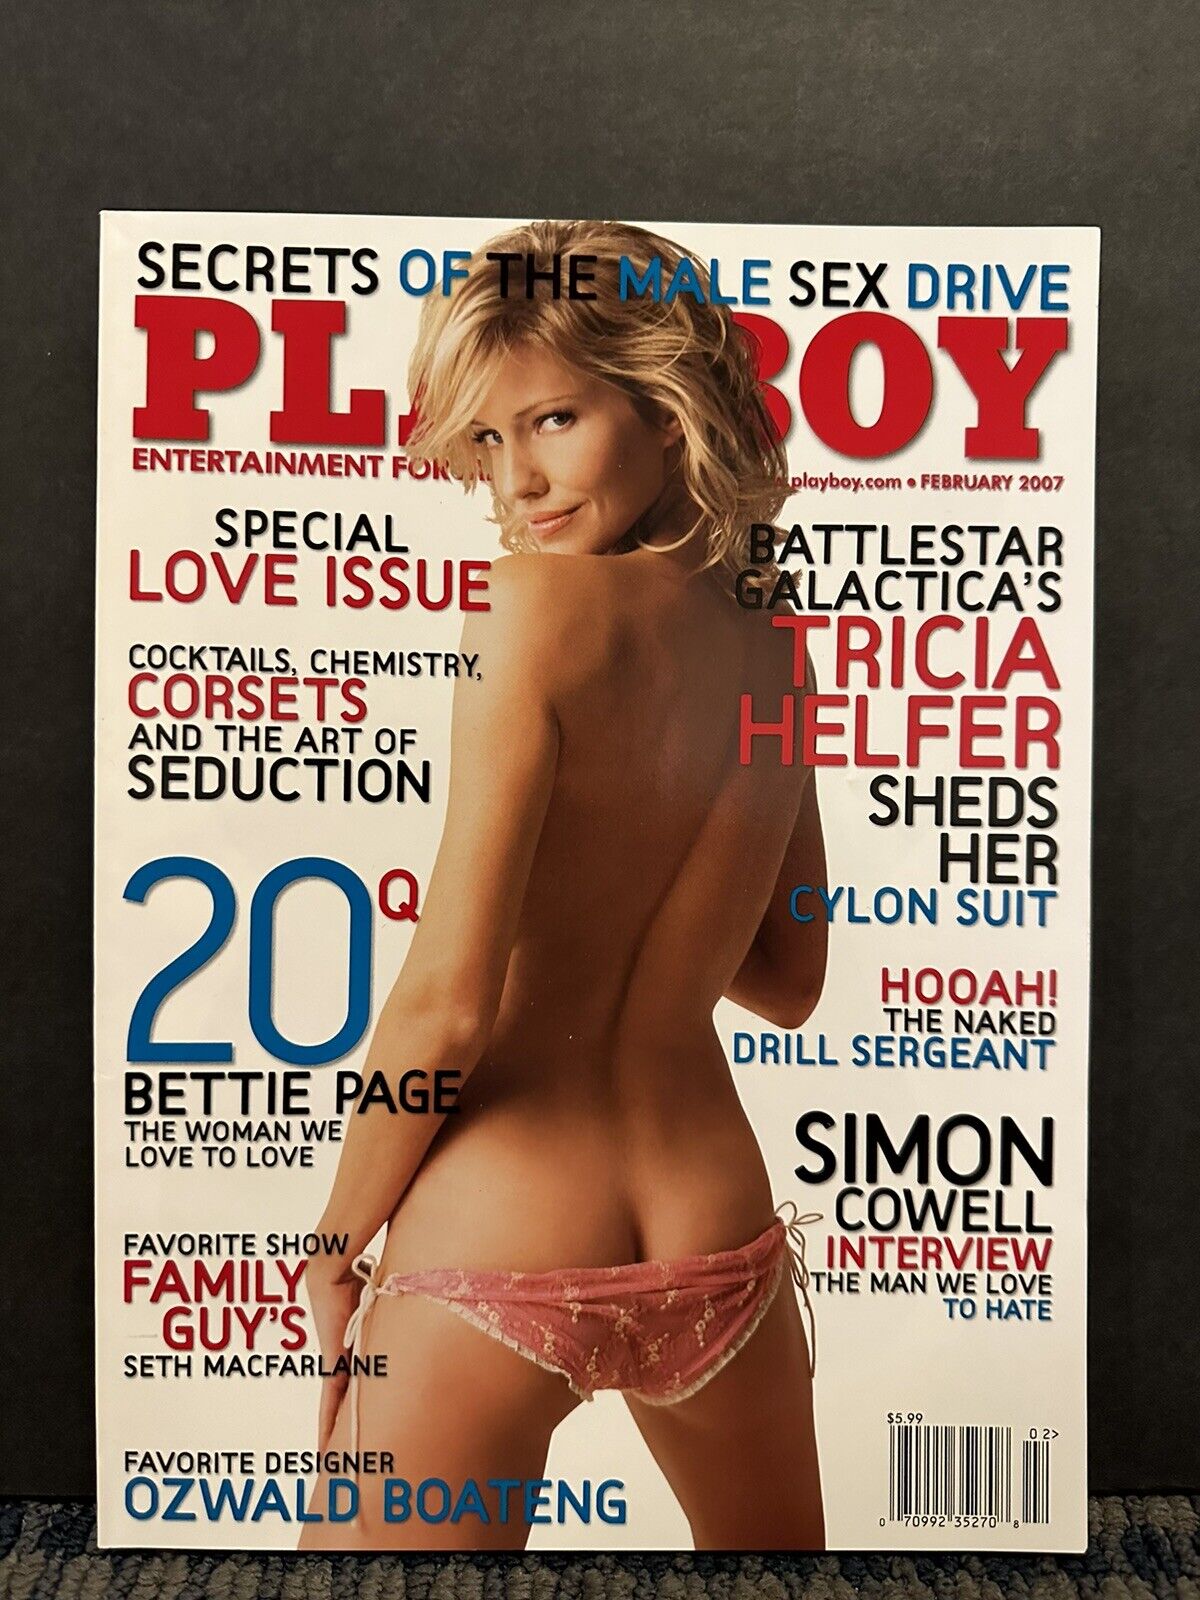 alma belle velasco recommends tricia helfer playboy 2007 pic